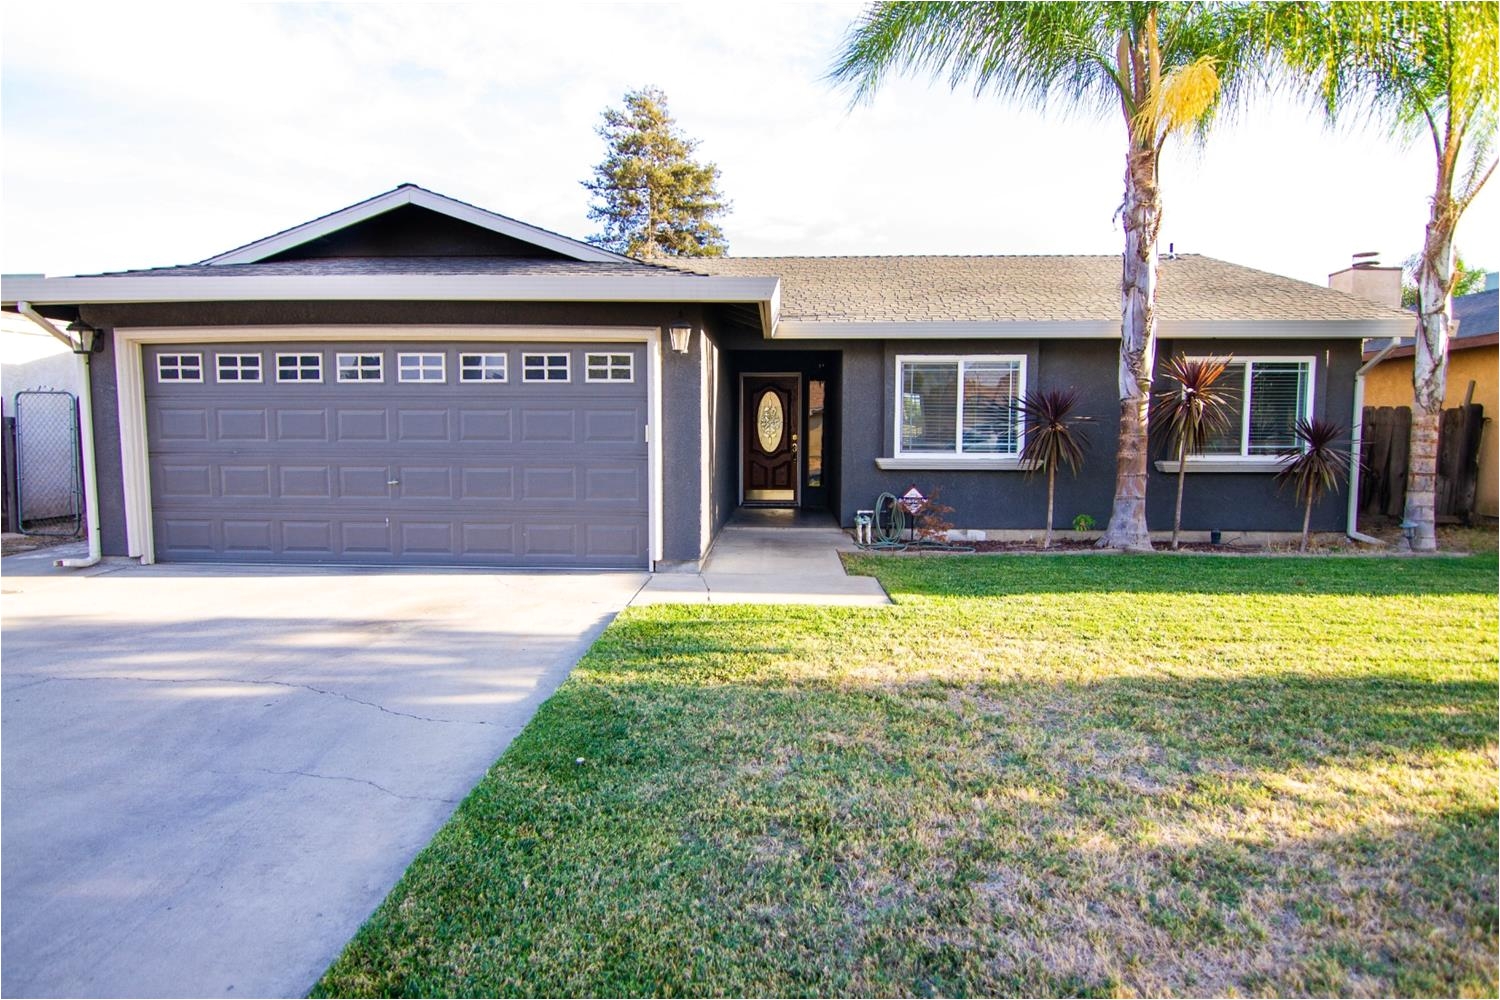 2020 nimrood dr ceres ca 95307 pending sale 259900